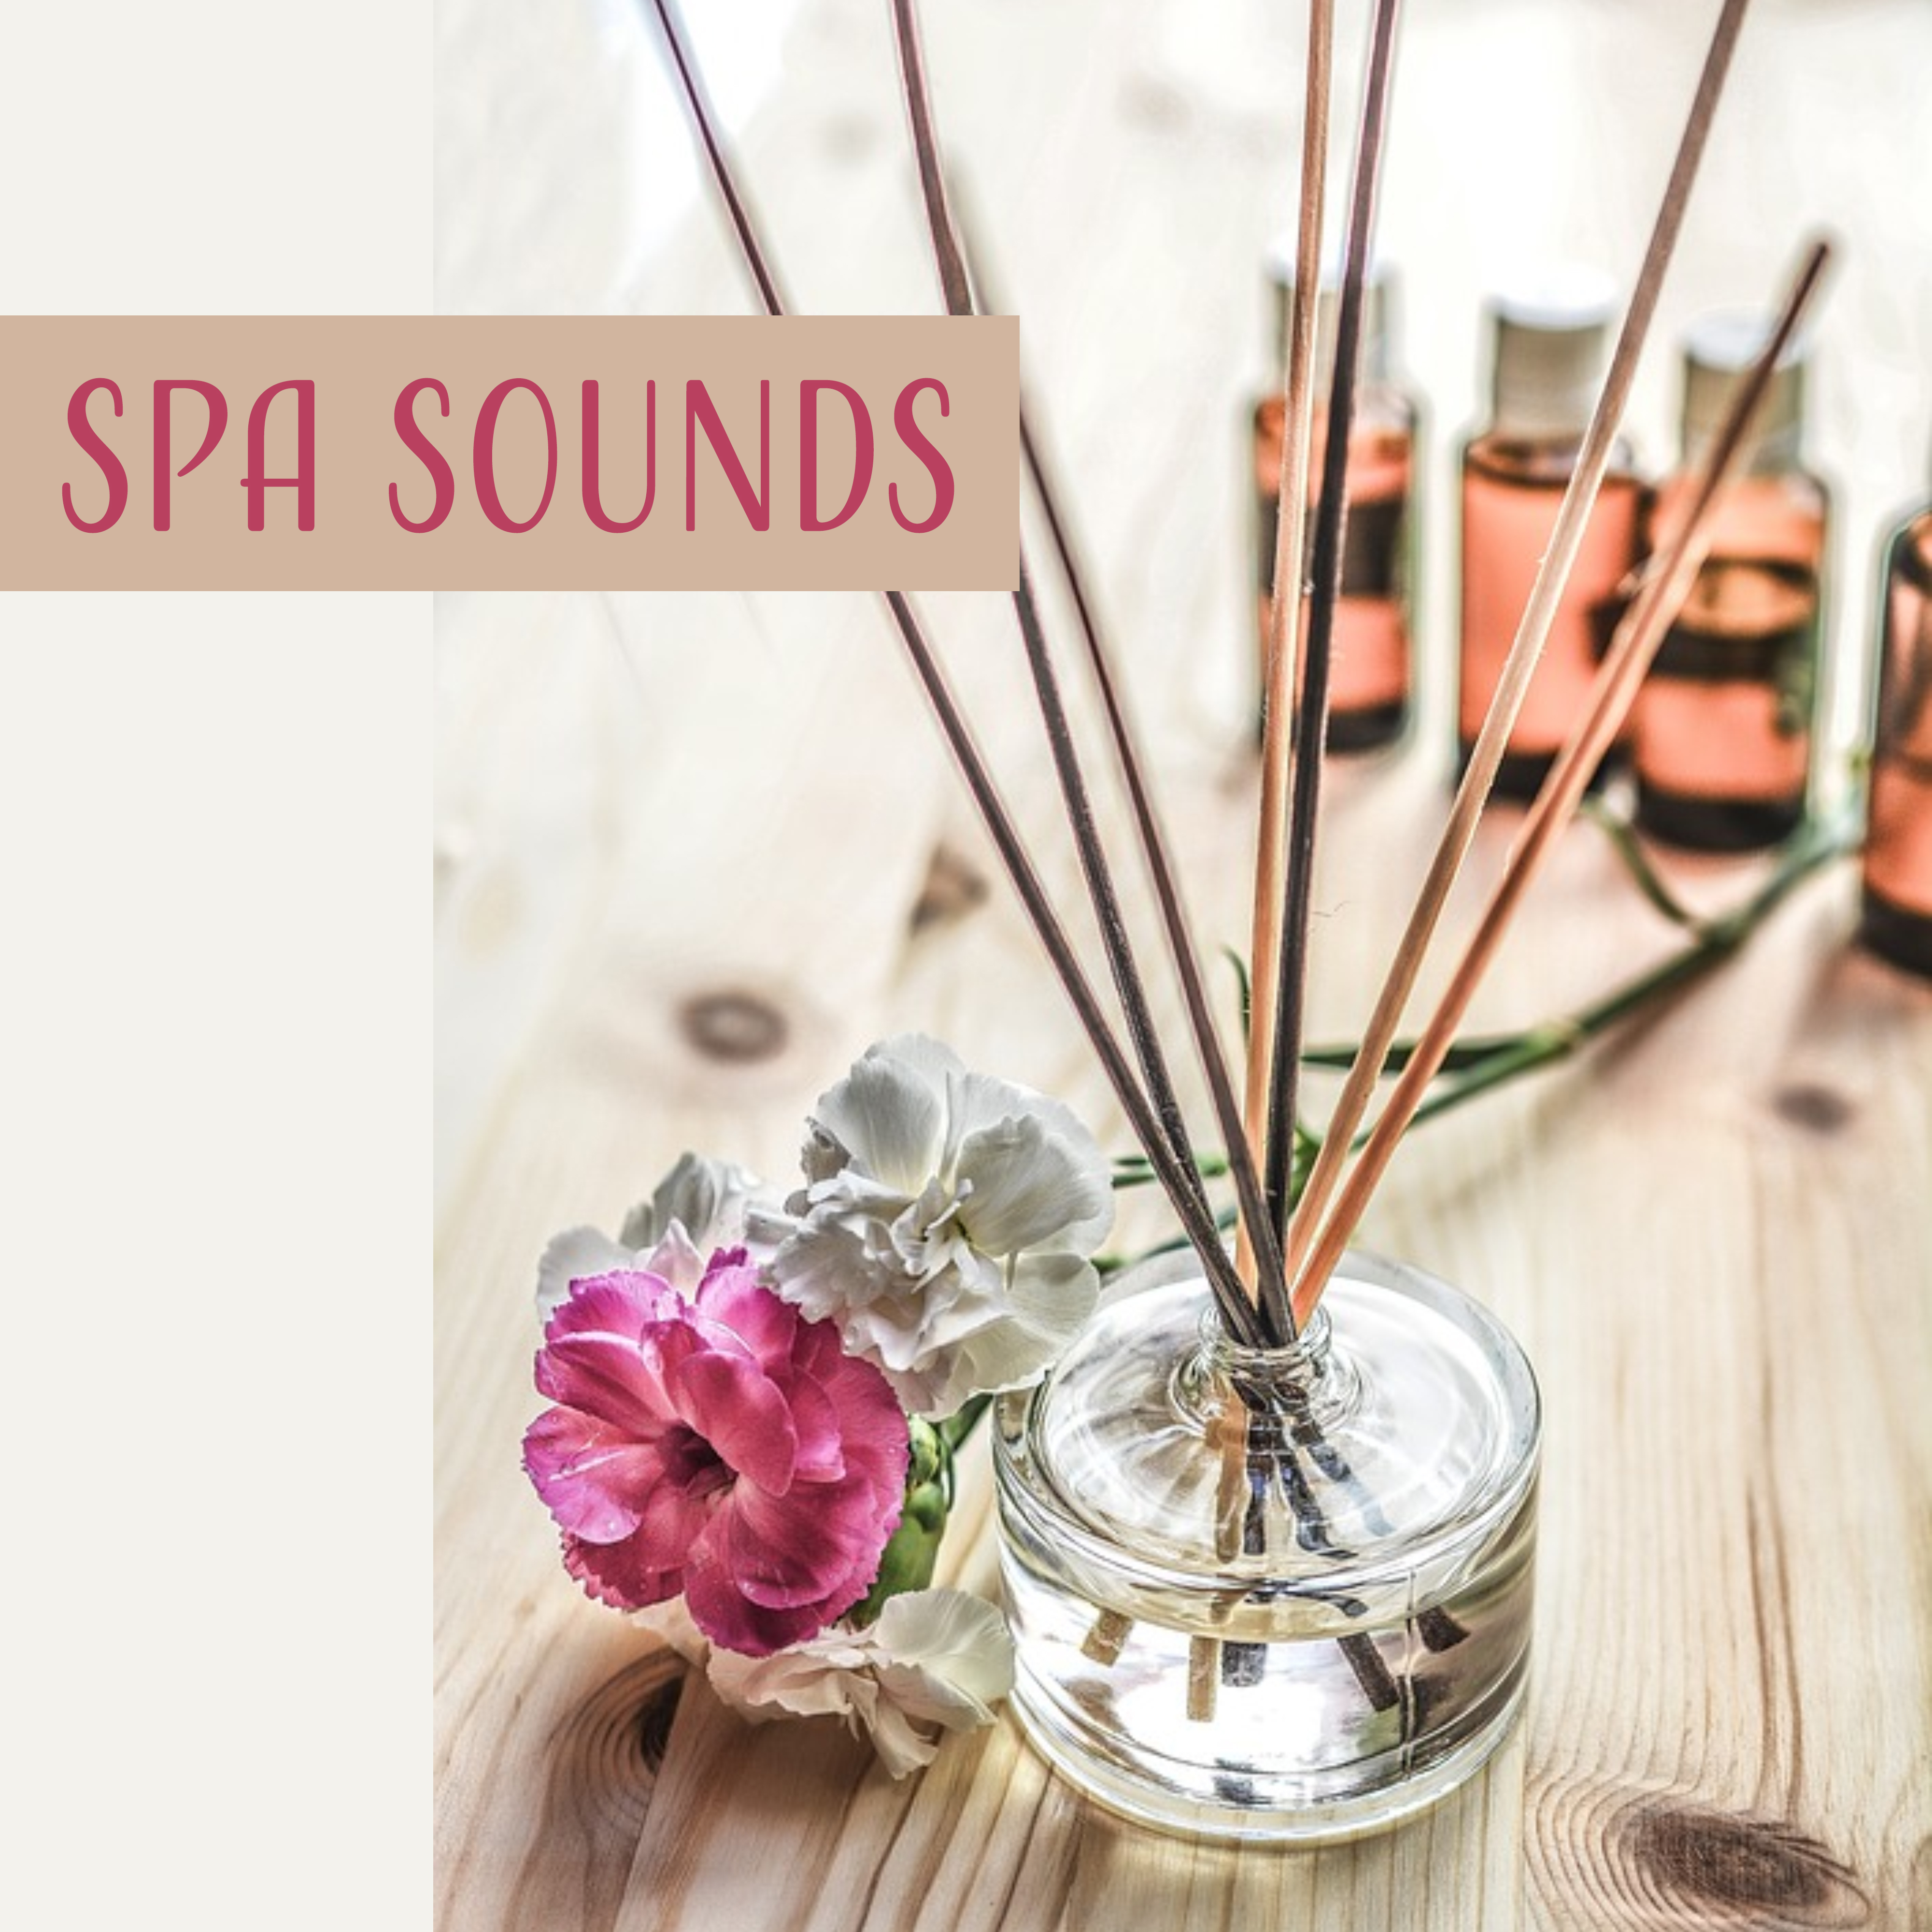 Spa Sounds – Spa Background Music, Full of Nature Sounds, New Age Music, Bird Sounds